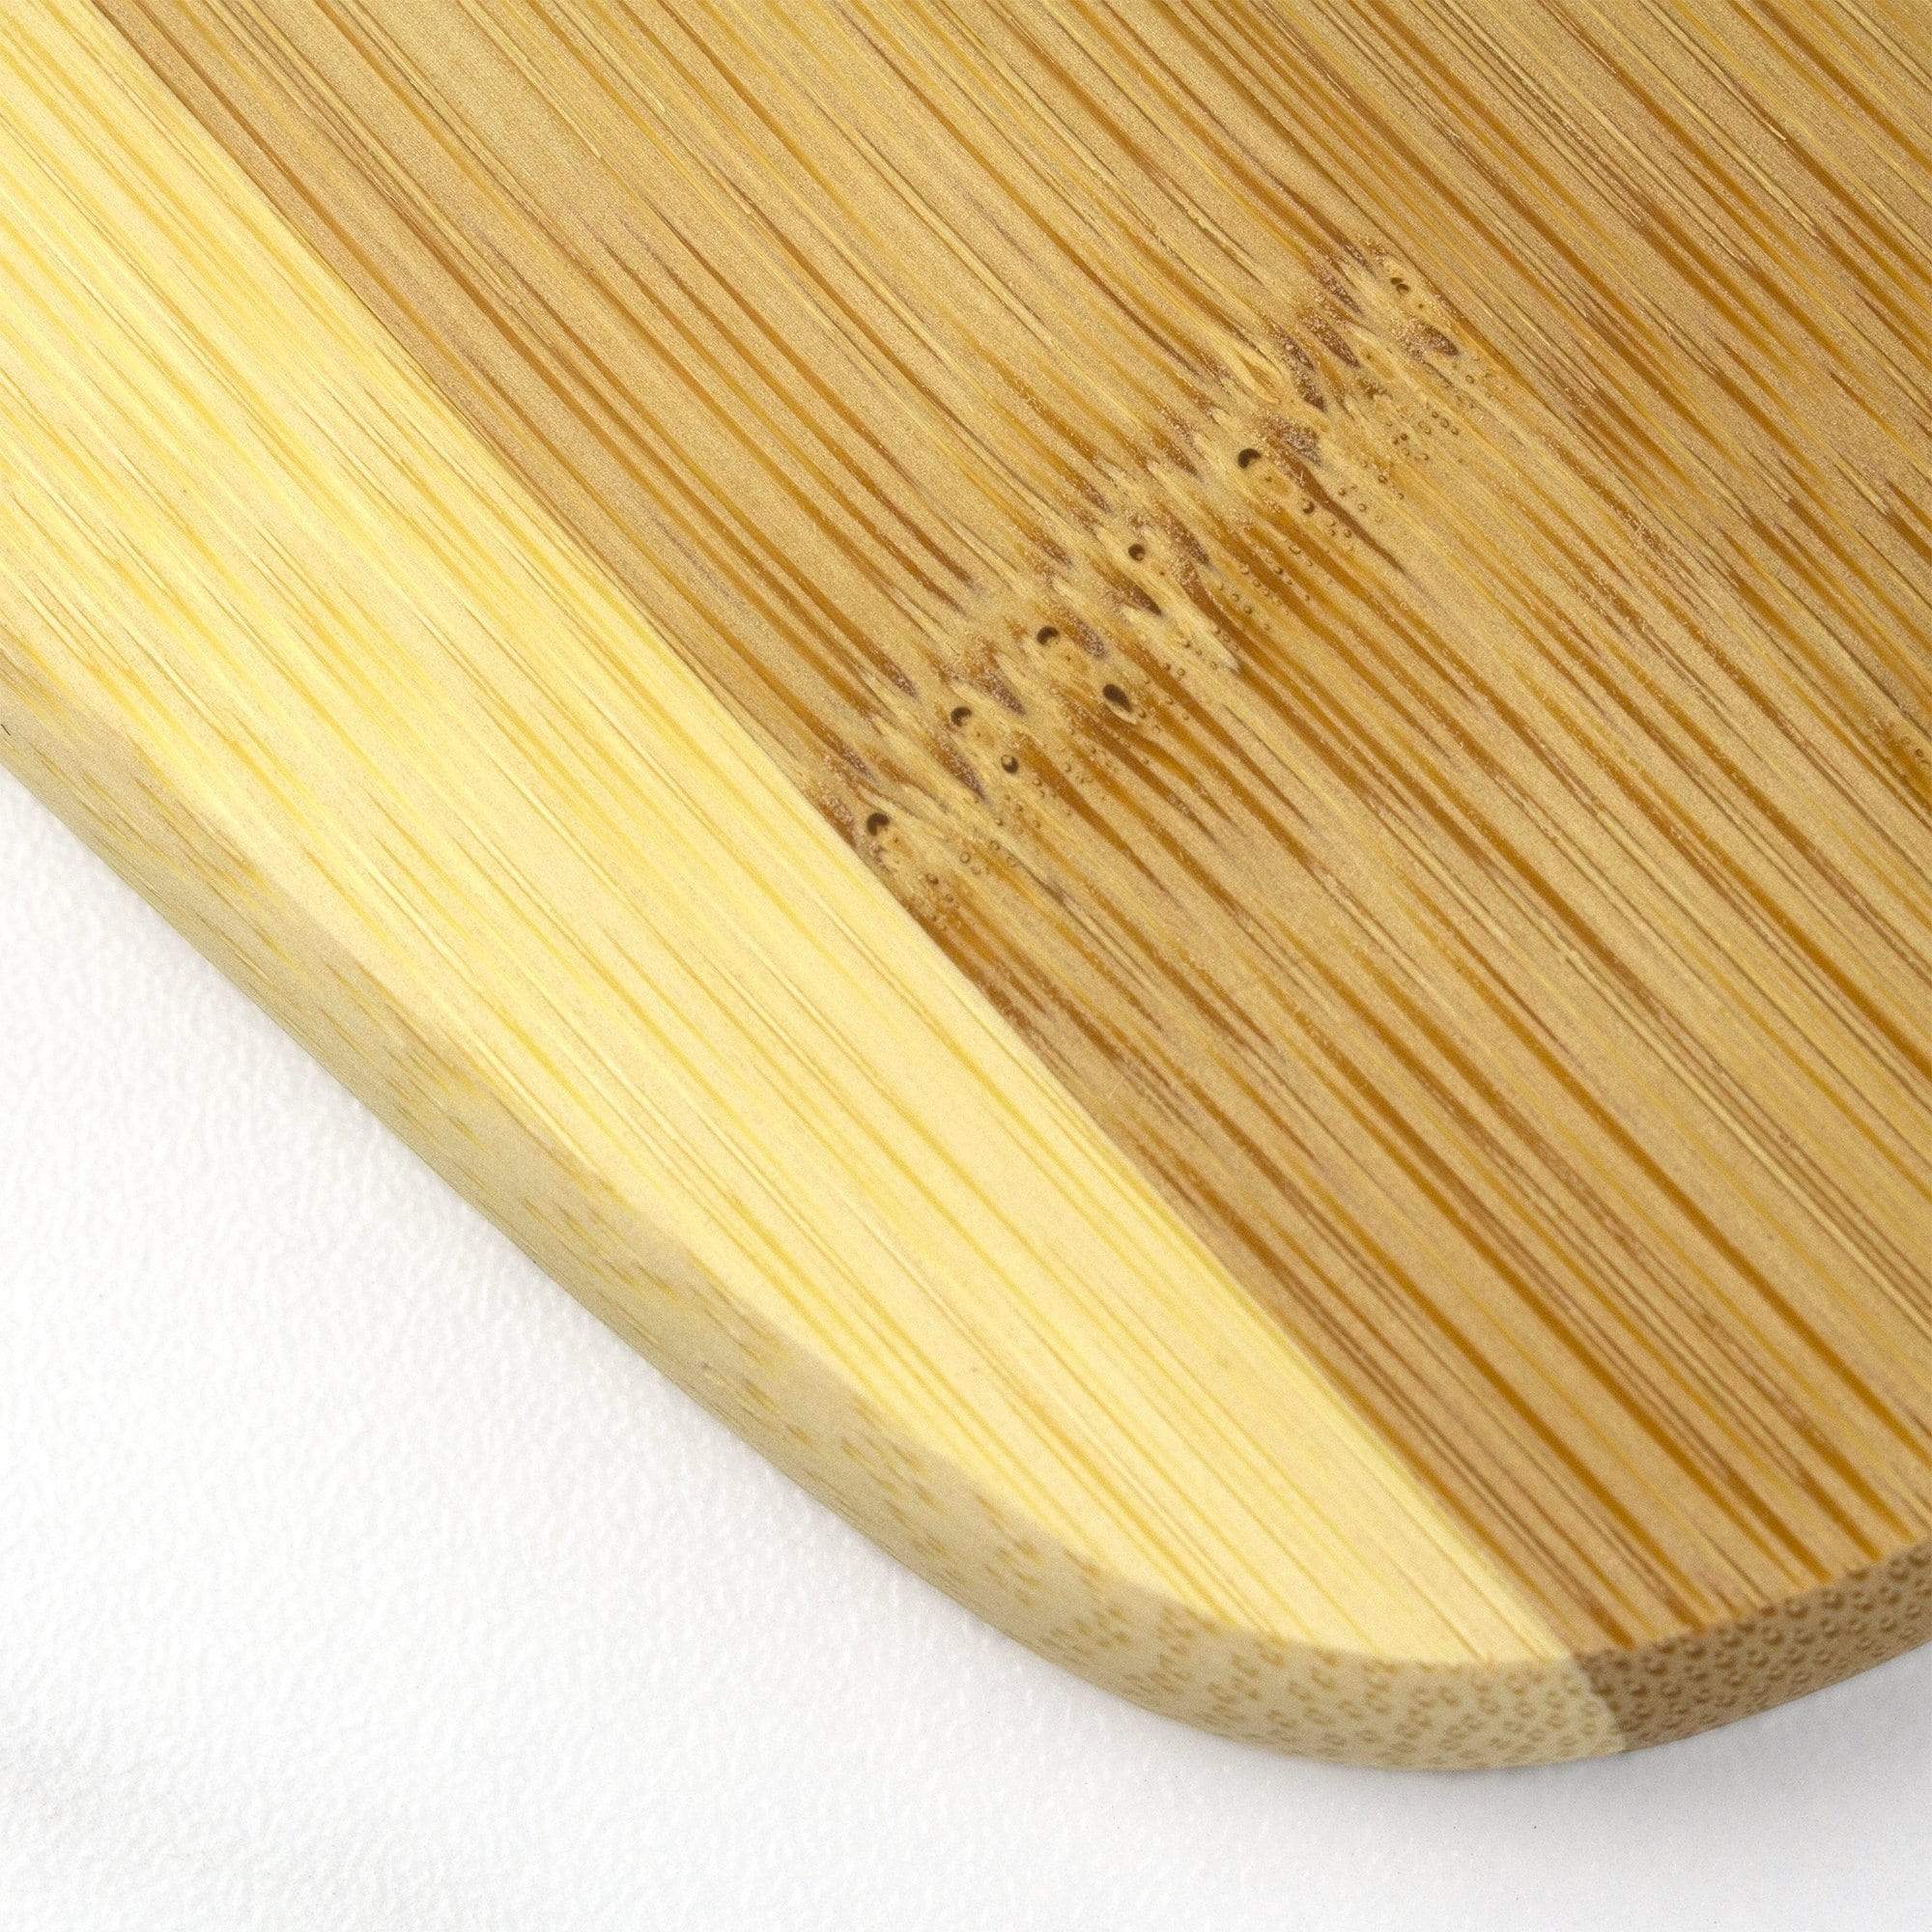 https://totallybamboo.com/cdn/shop/products/3-piece-two-tone-bamboo-serving-and-cutting-board-set-totally-bamboo-260351.jpg?v=1628141815